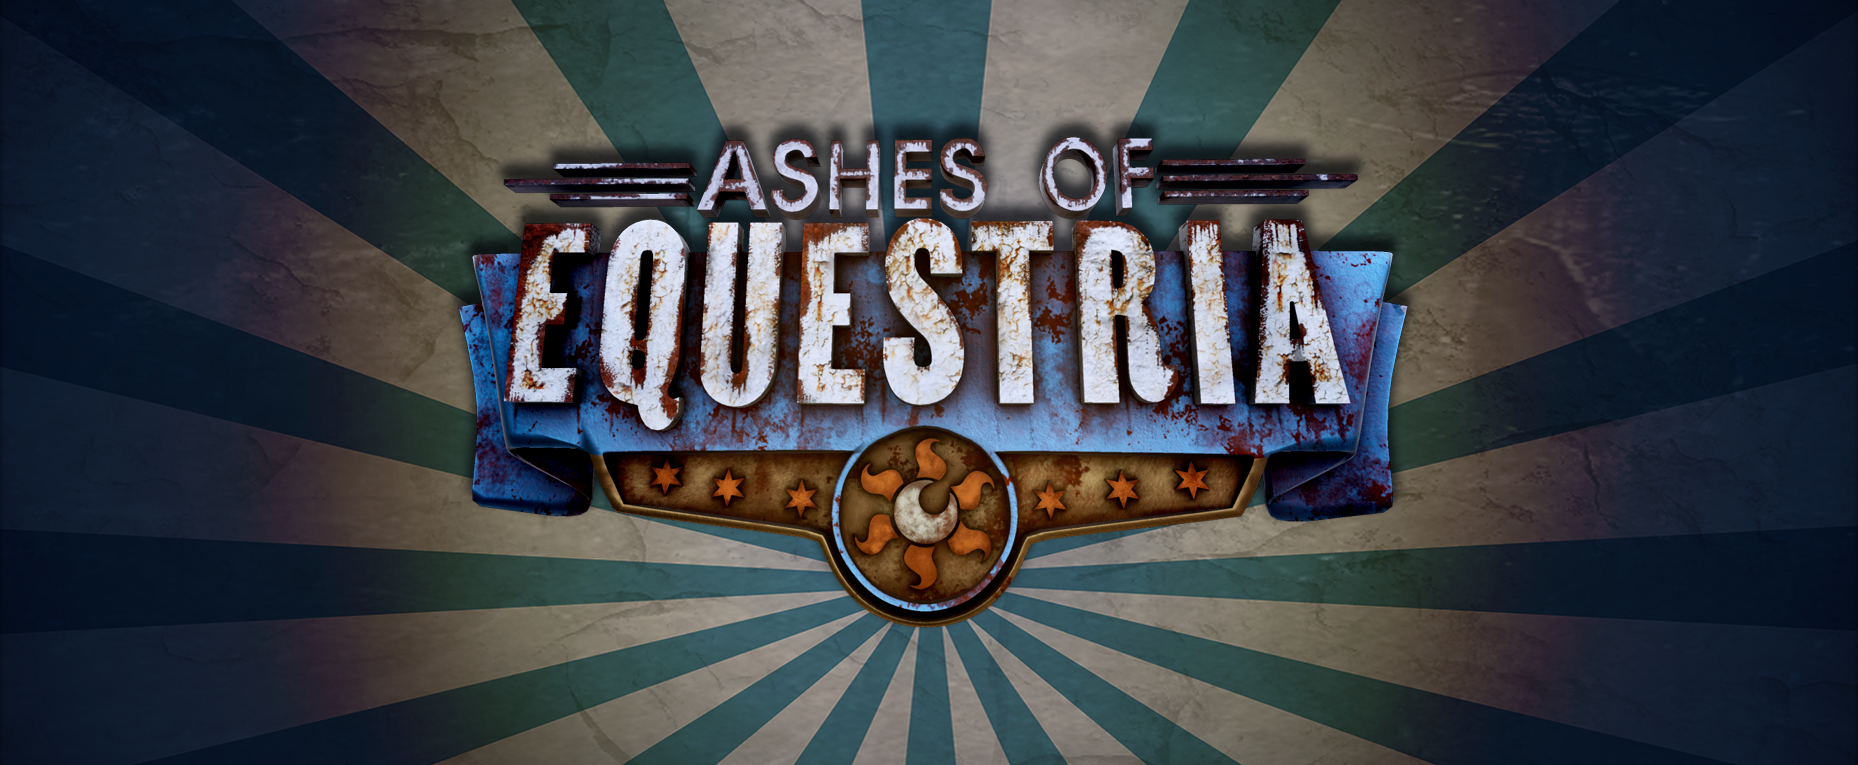 Ashes of Equestria